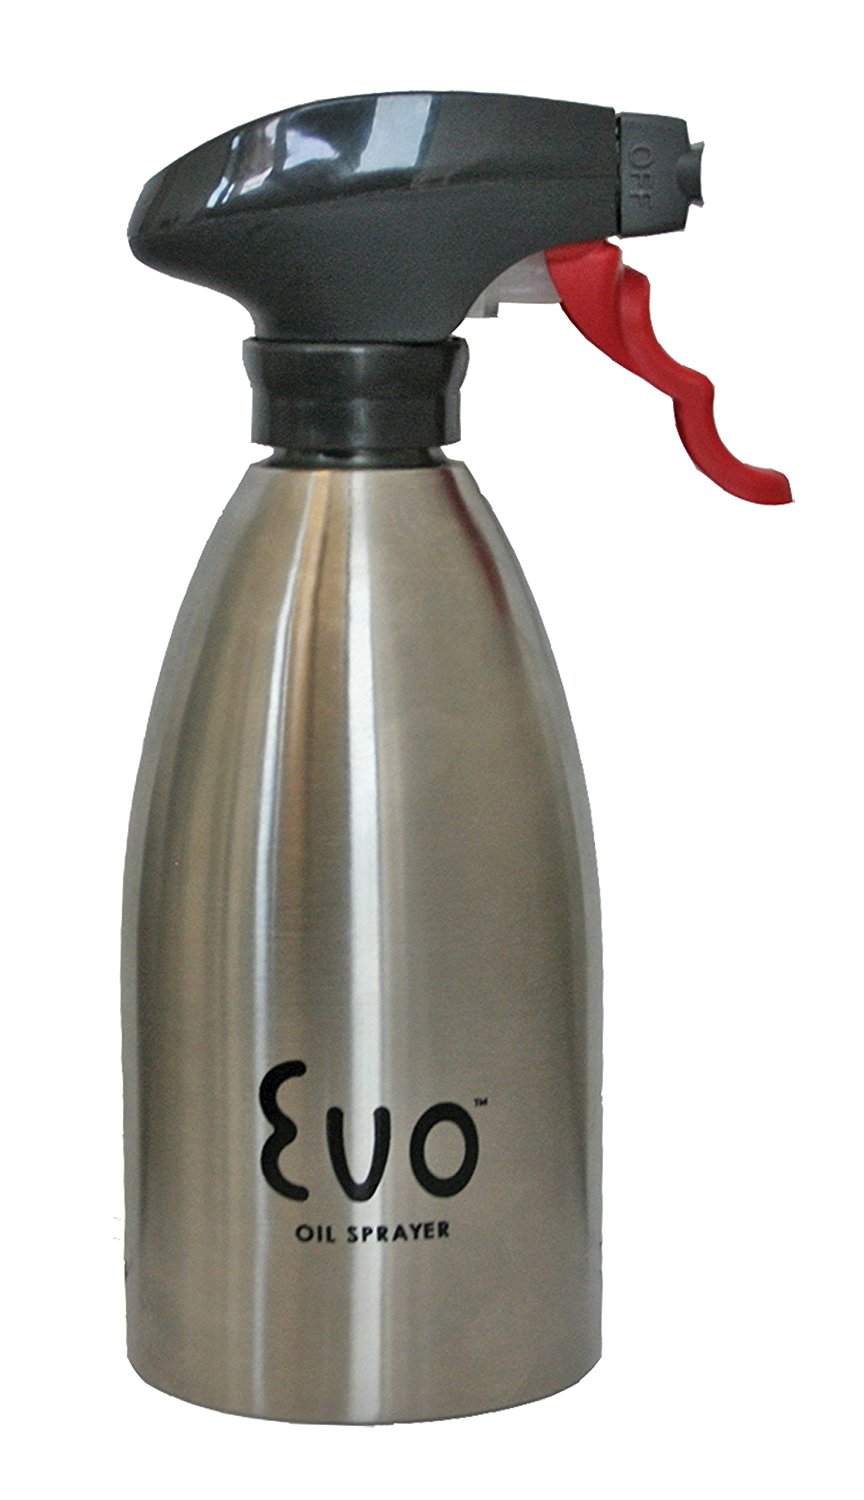 EVO Oil Sprayer Non-Aerosol for Olive Oil and Cooking Oils 16oz Stainless Steel 